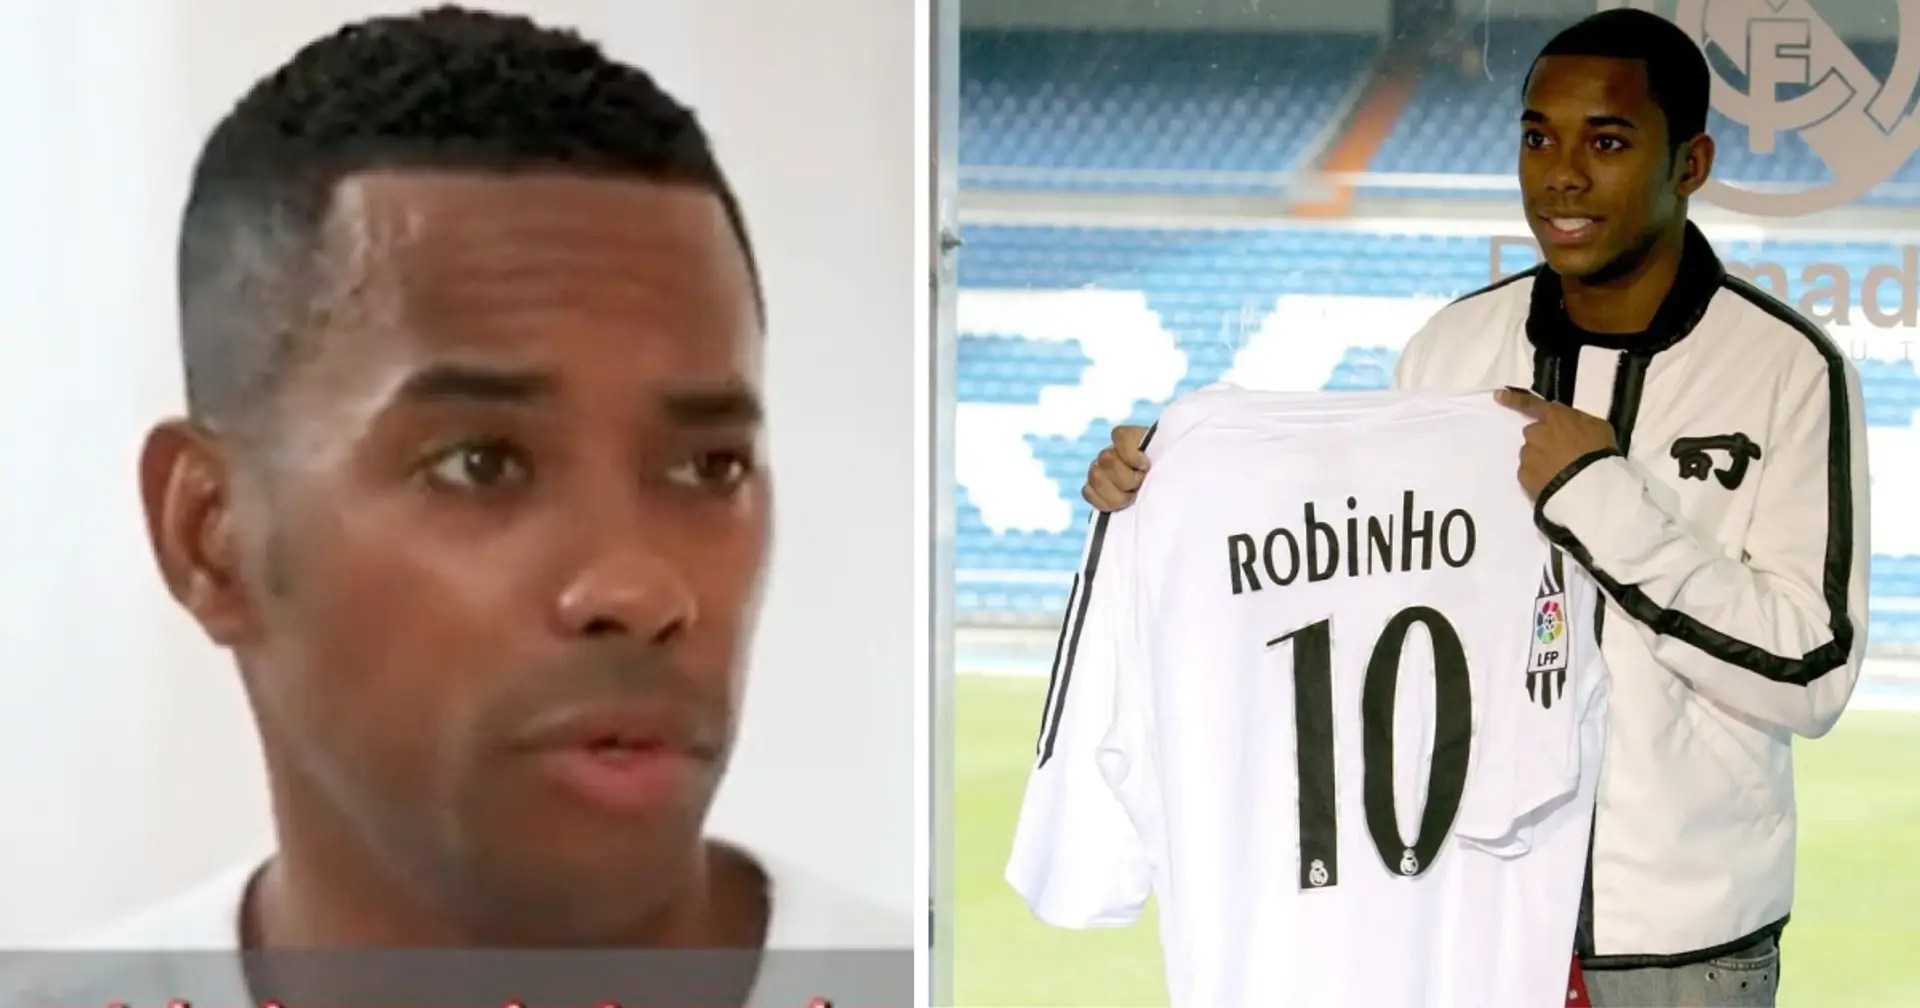 'I'm not a monster': Real Madrid former star boy Robinho speaks out after being sentenced to 9 years in prison for rape